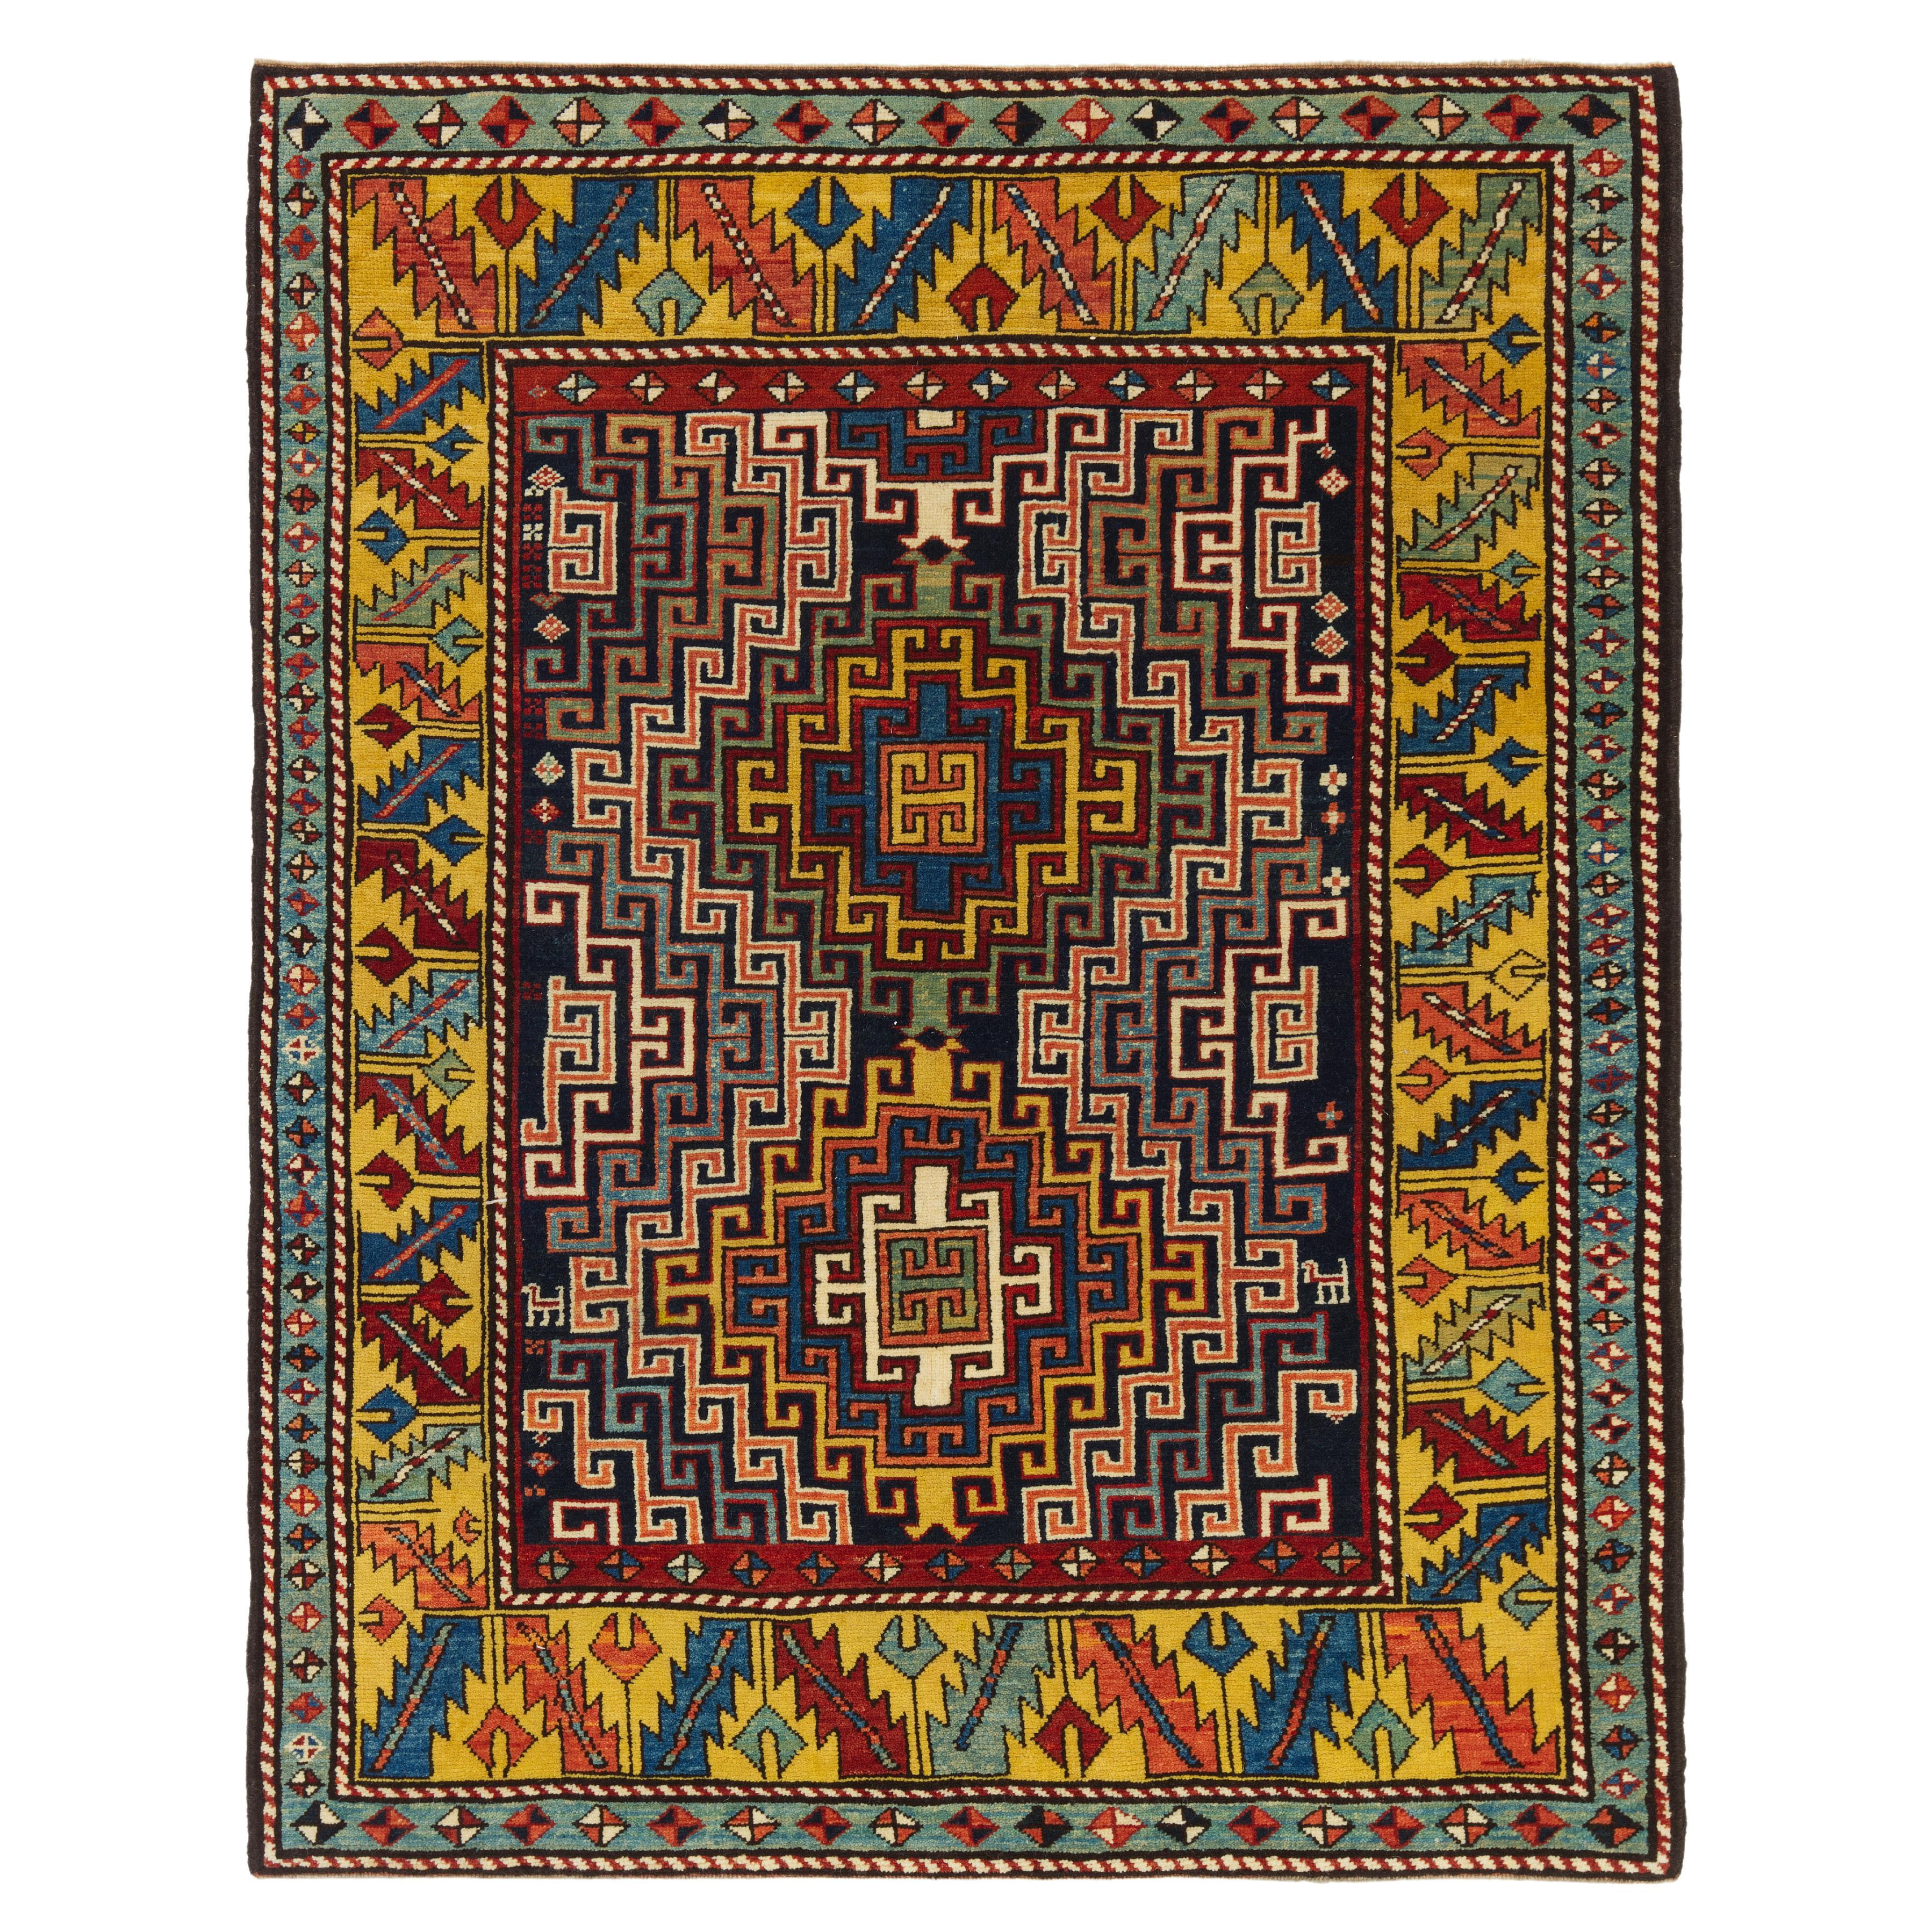 Ararat Rugs Kazak Rug with Hooked Medallions Antique Revival Carpet Natural Dyed